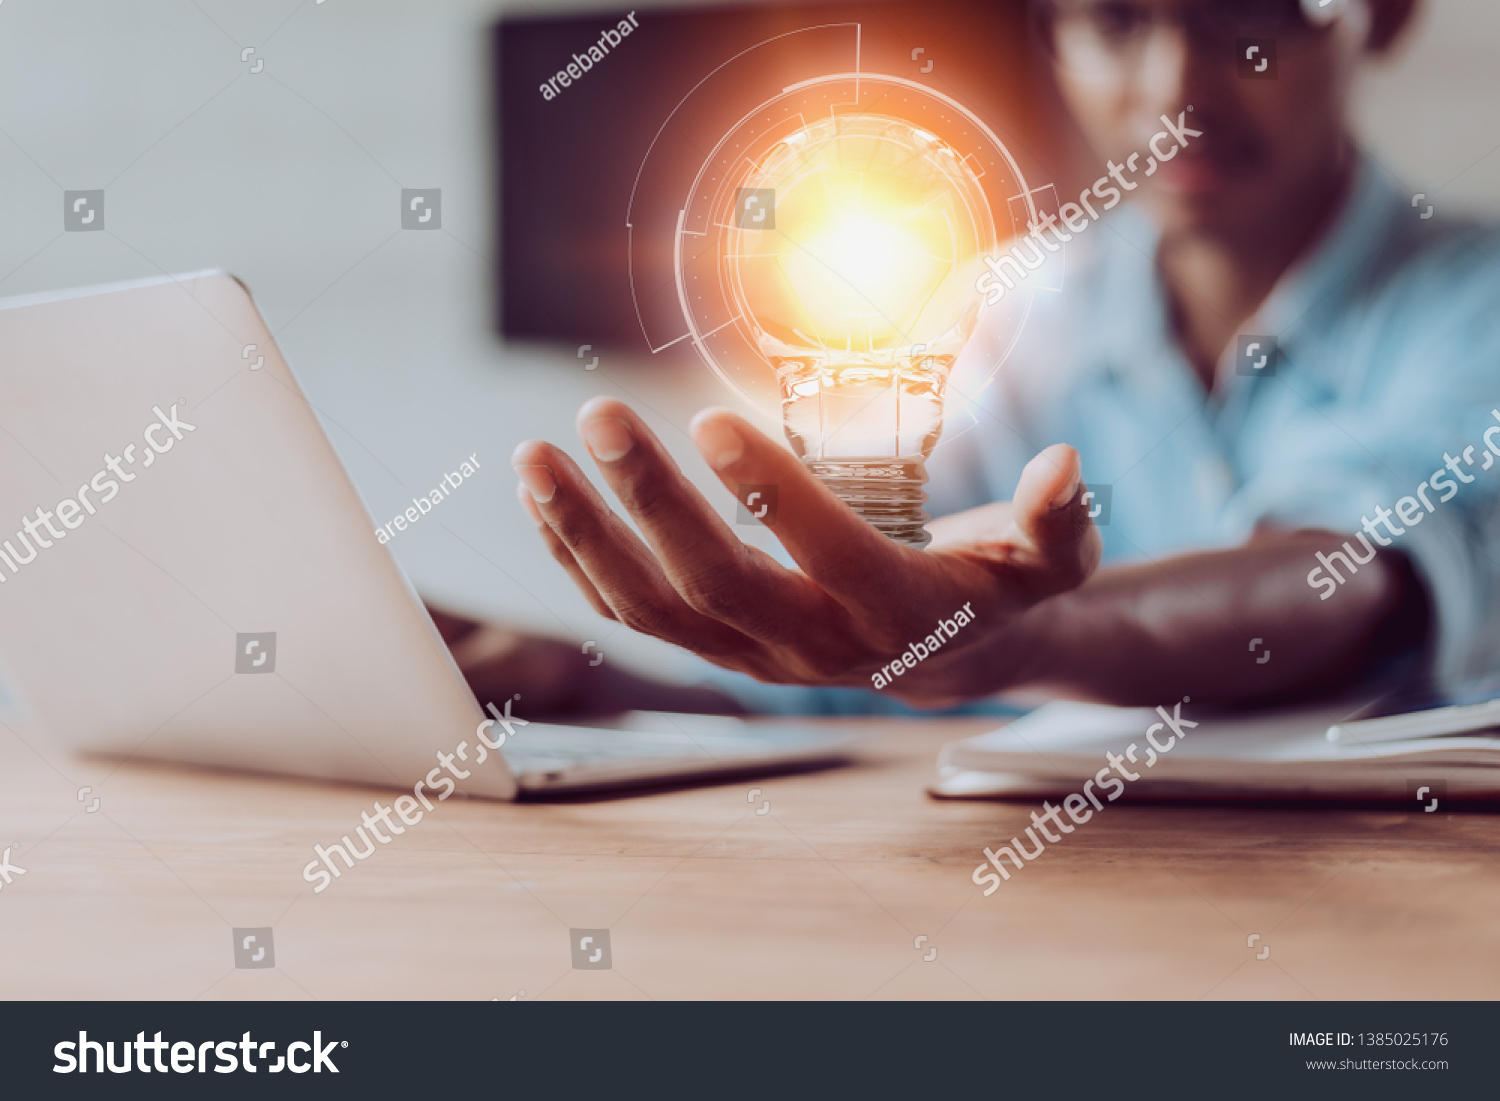 Creativity and innovative are keys to success.Concept of new idea and innovation with Brain and light bulbs.  #1385025176